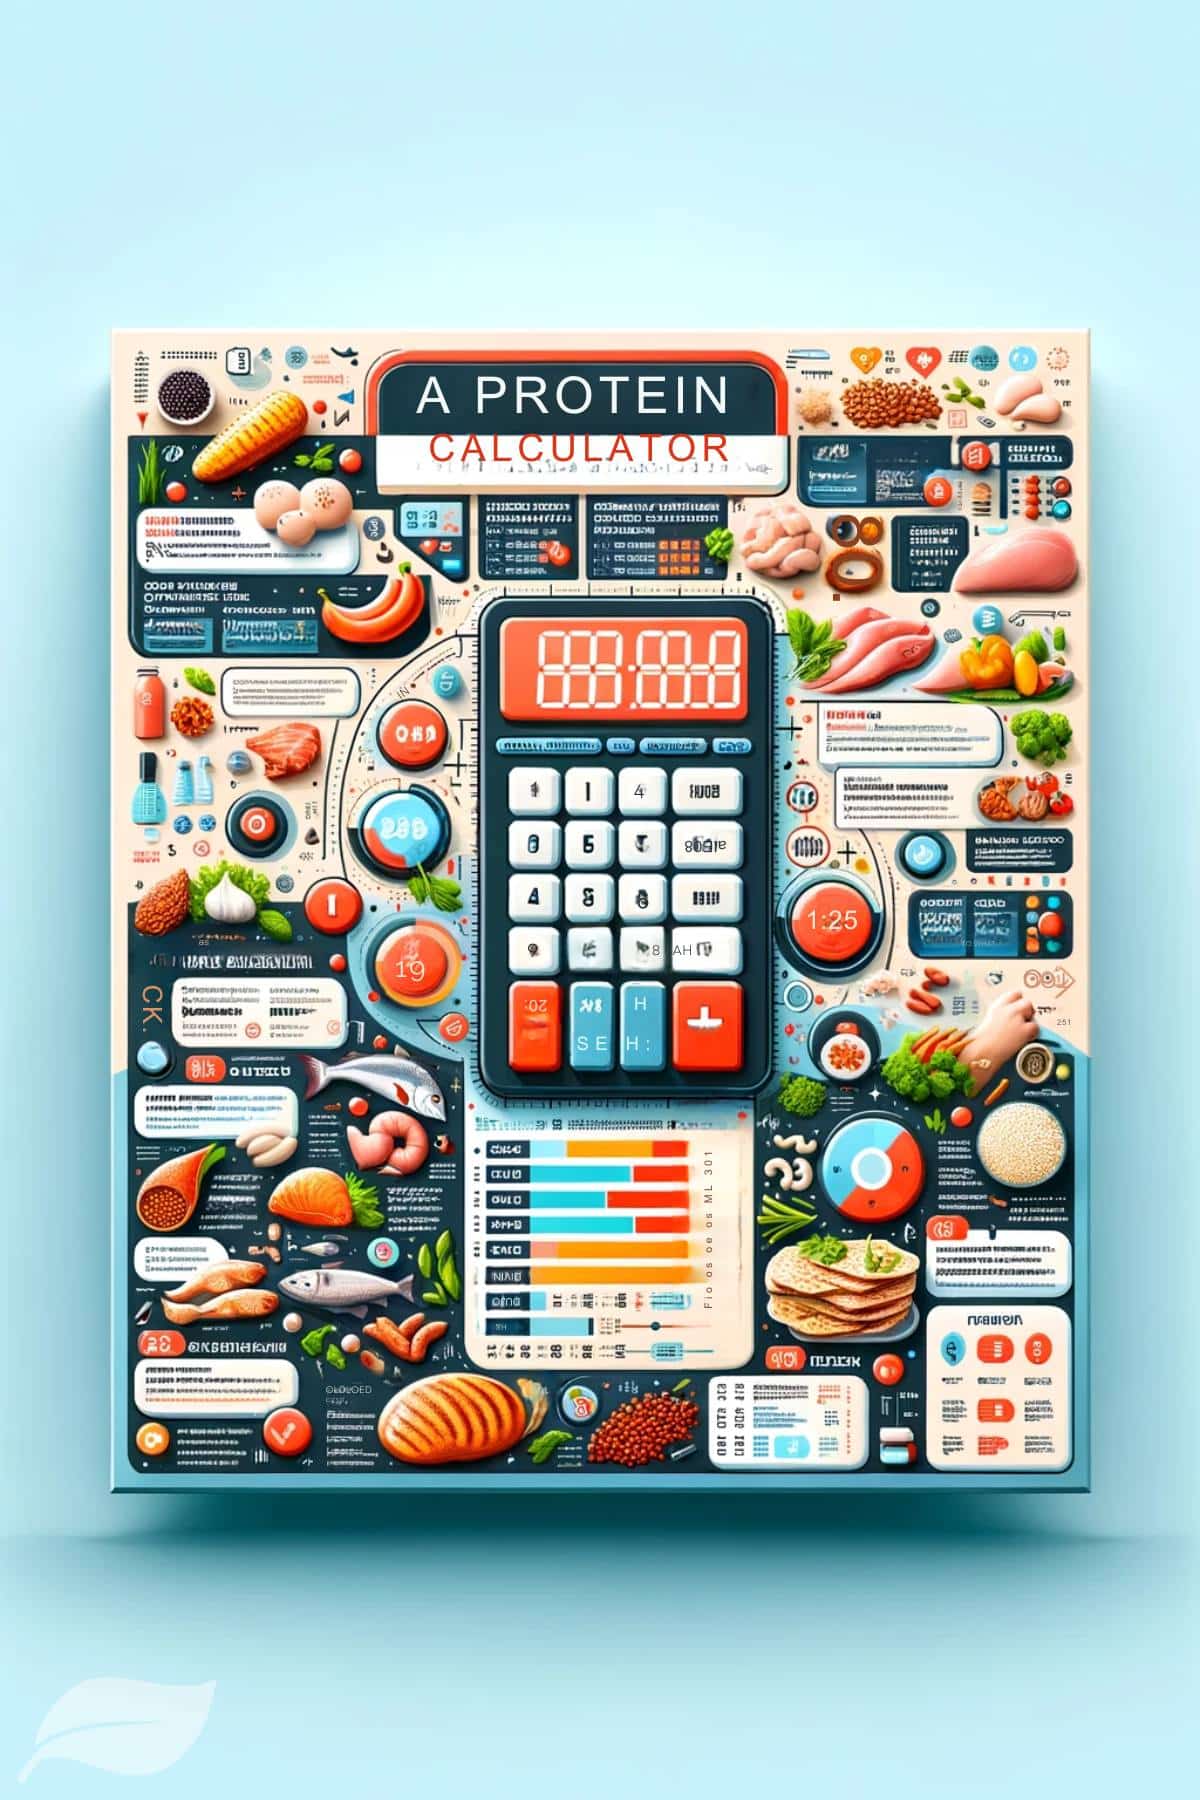 A visually engaging and detailed infographic explaining the concept of a protein calculator